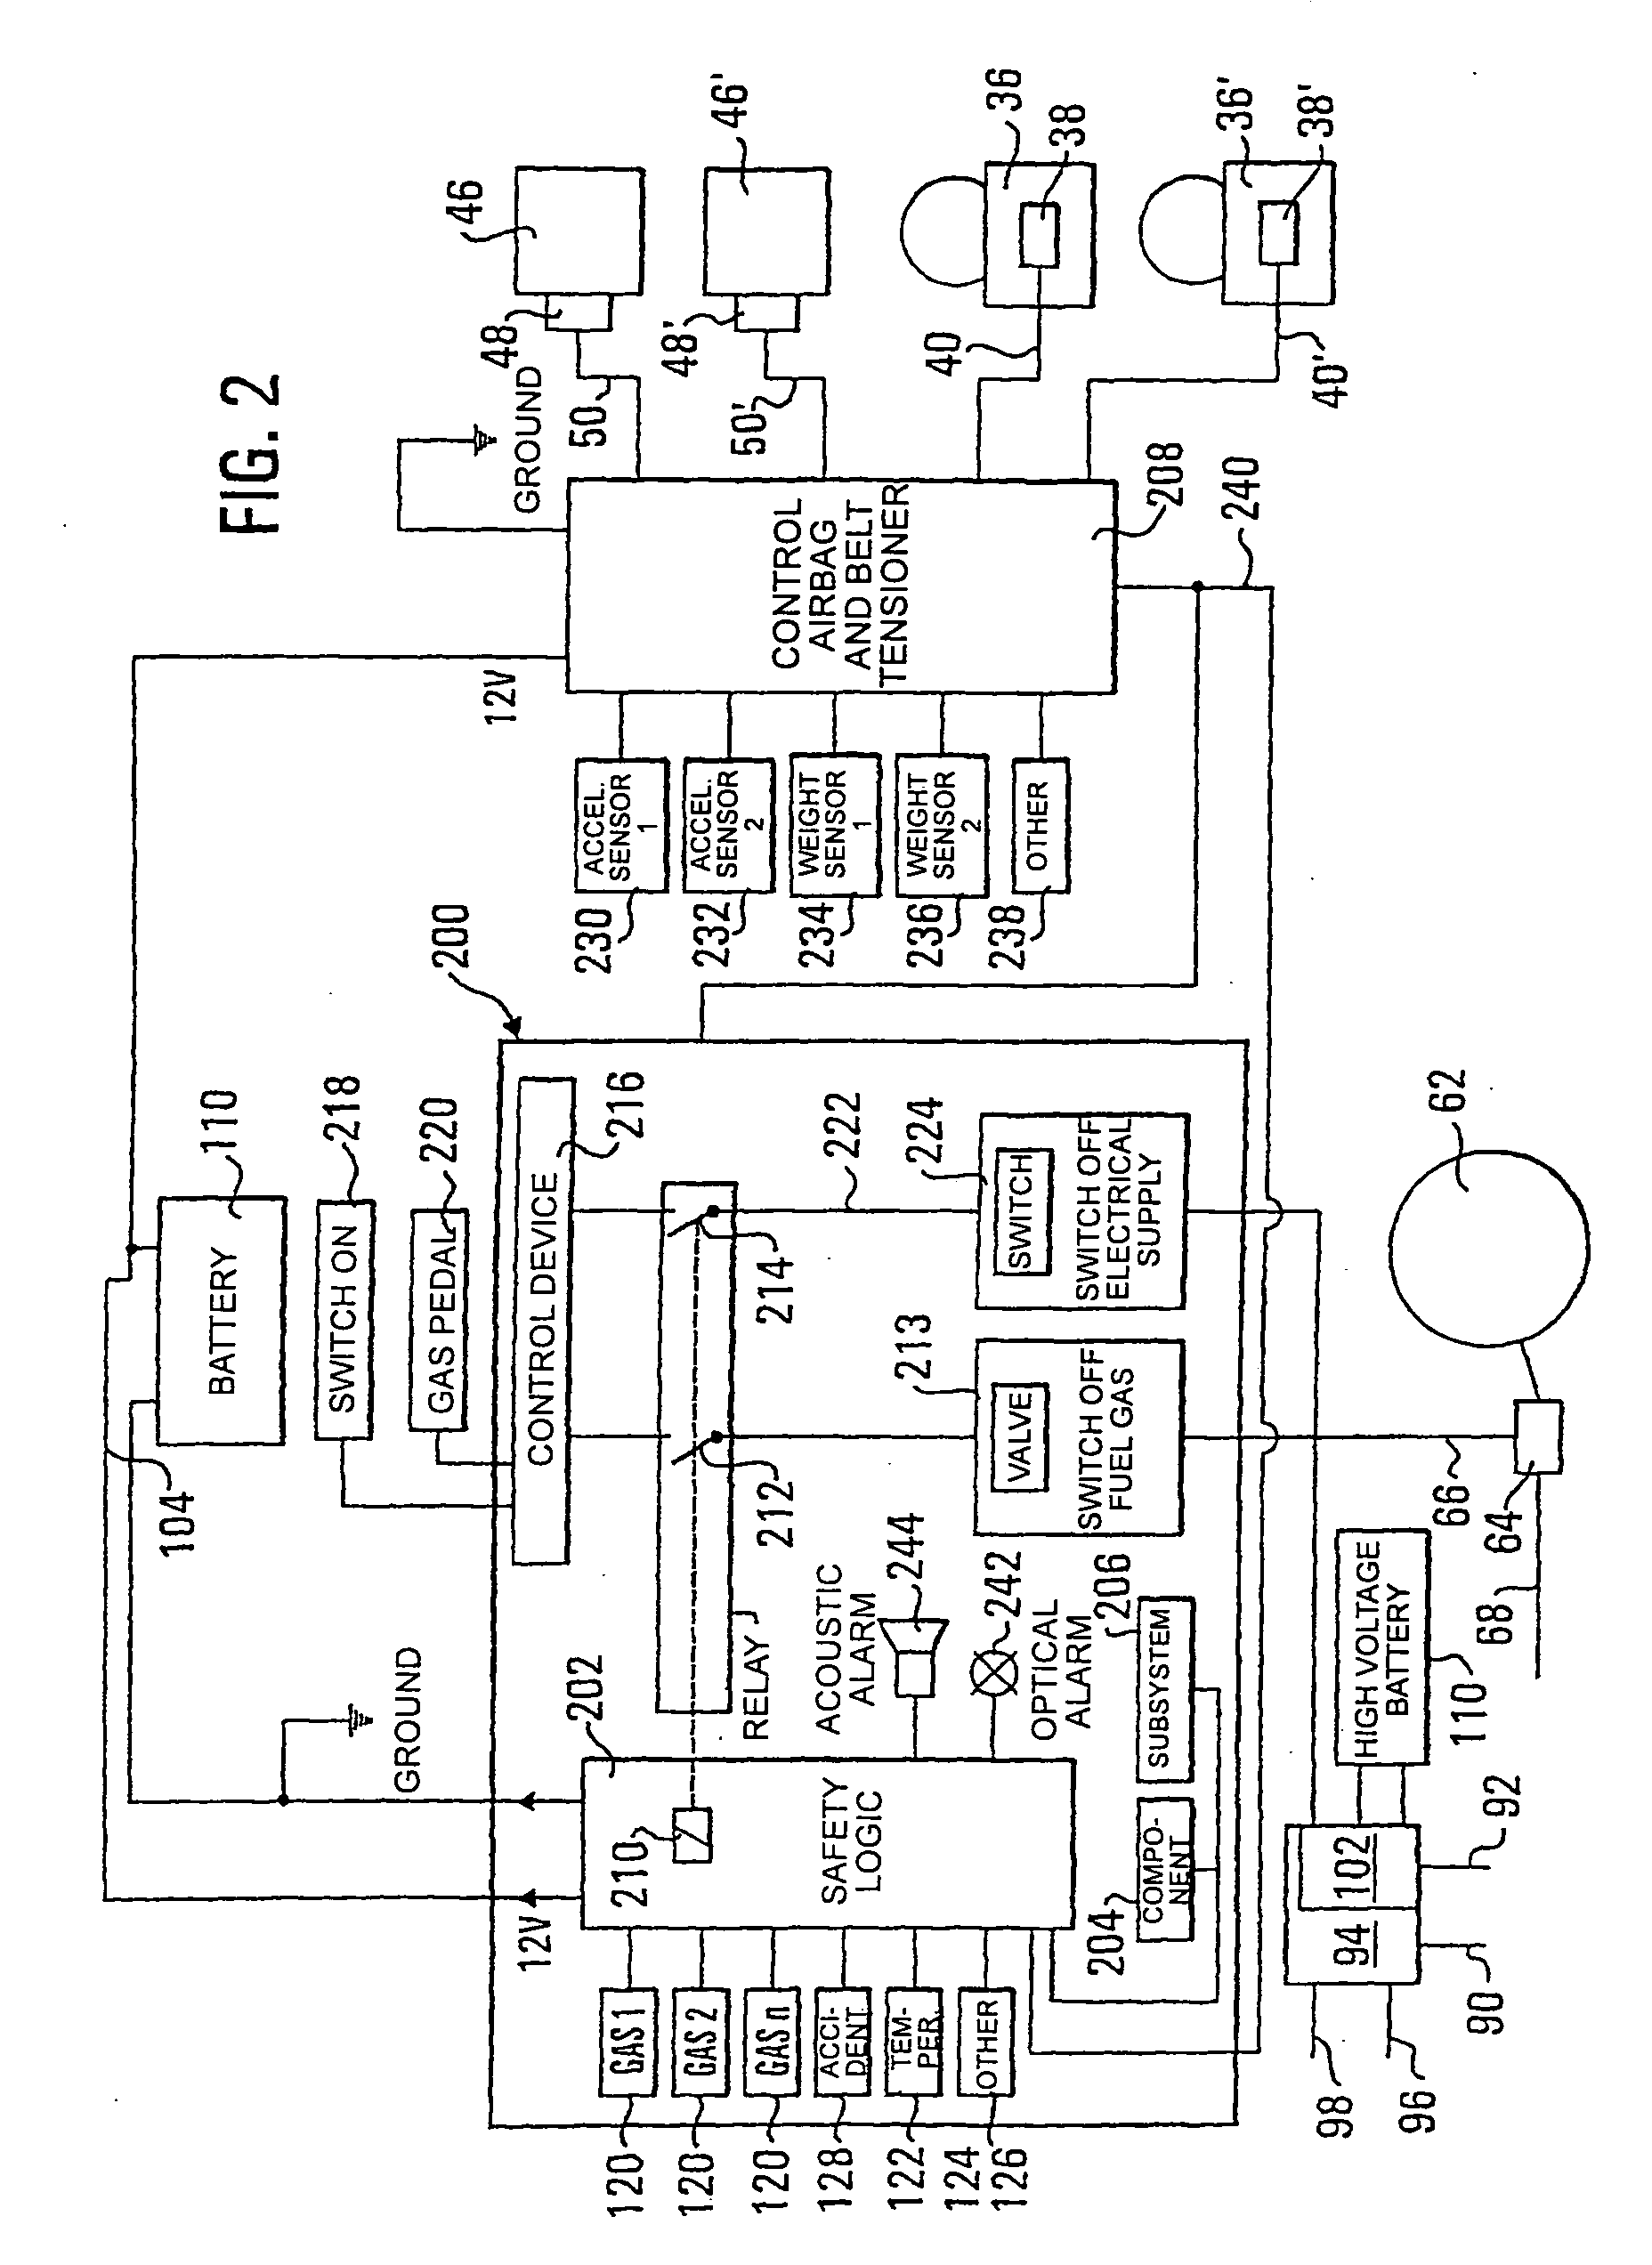 Safety system for use in a vehicle